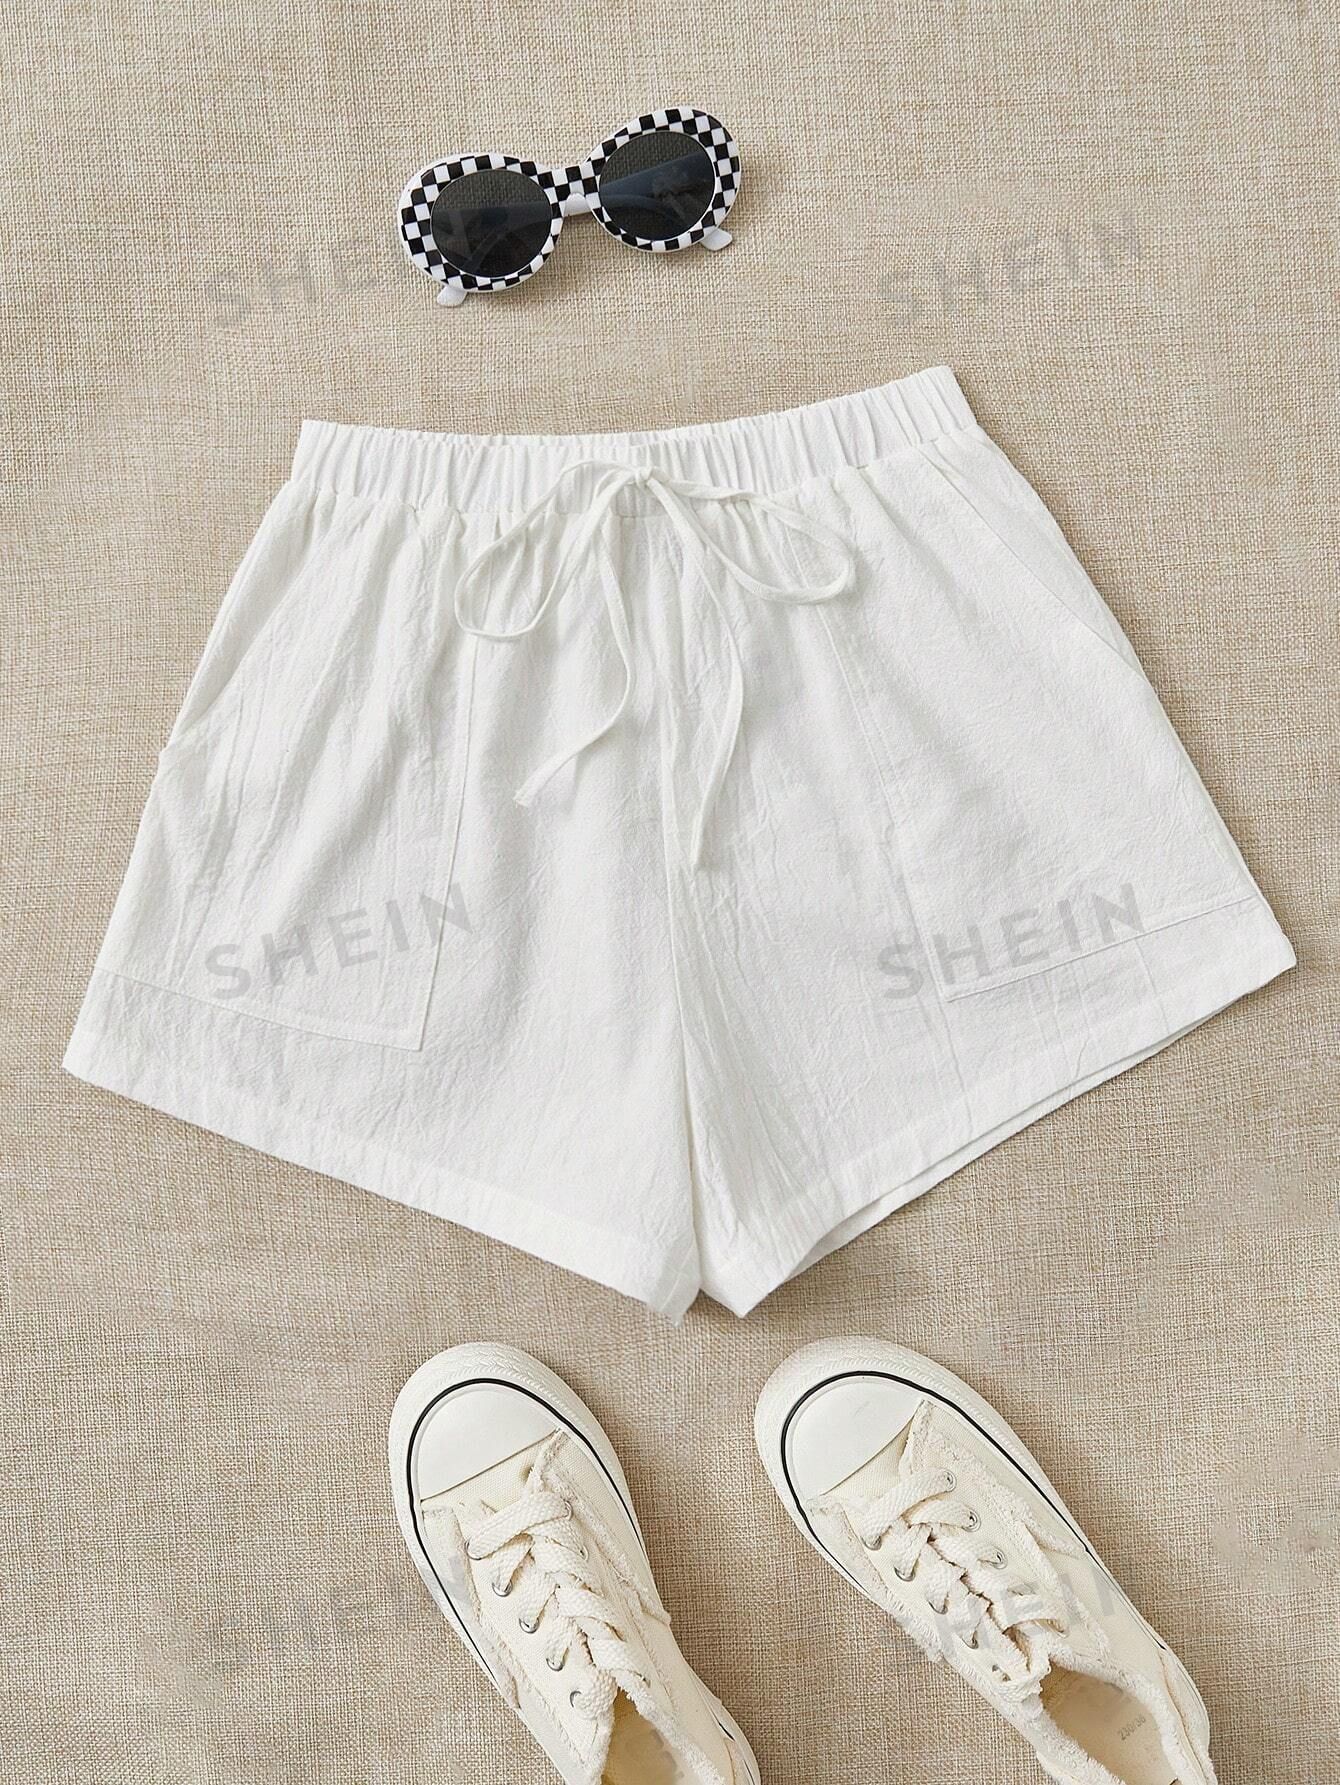 SHEIN EZwear Summer Loose And Casual White Tie Waist Slant Pocket Cotton And Linen Shorts | SHEIN